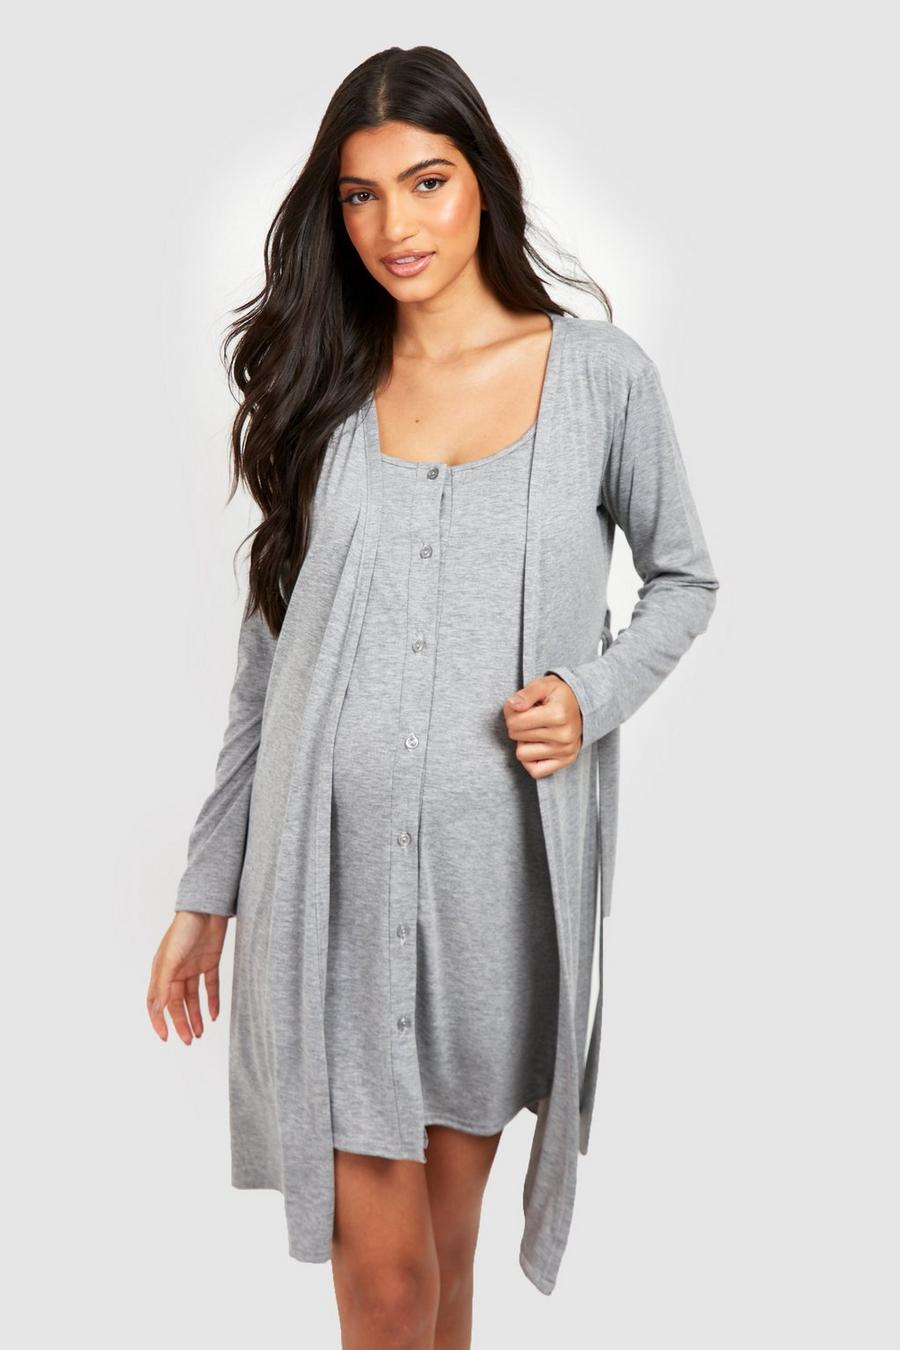 Grey marl Maternity Button Front Nightgown And Robe